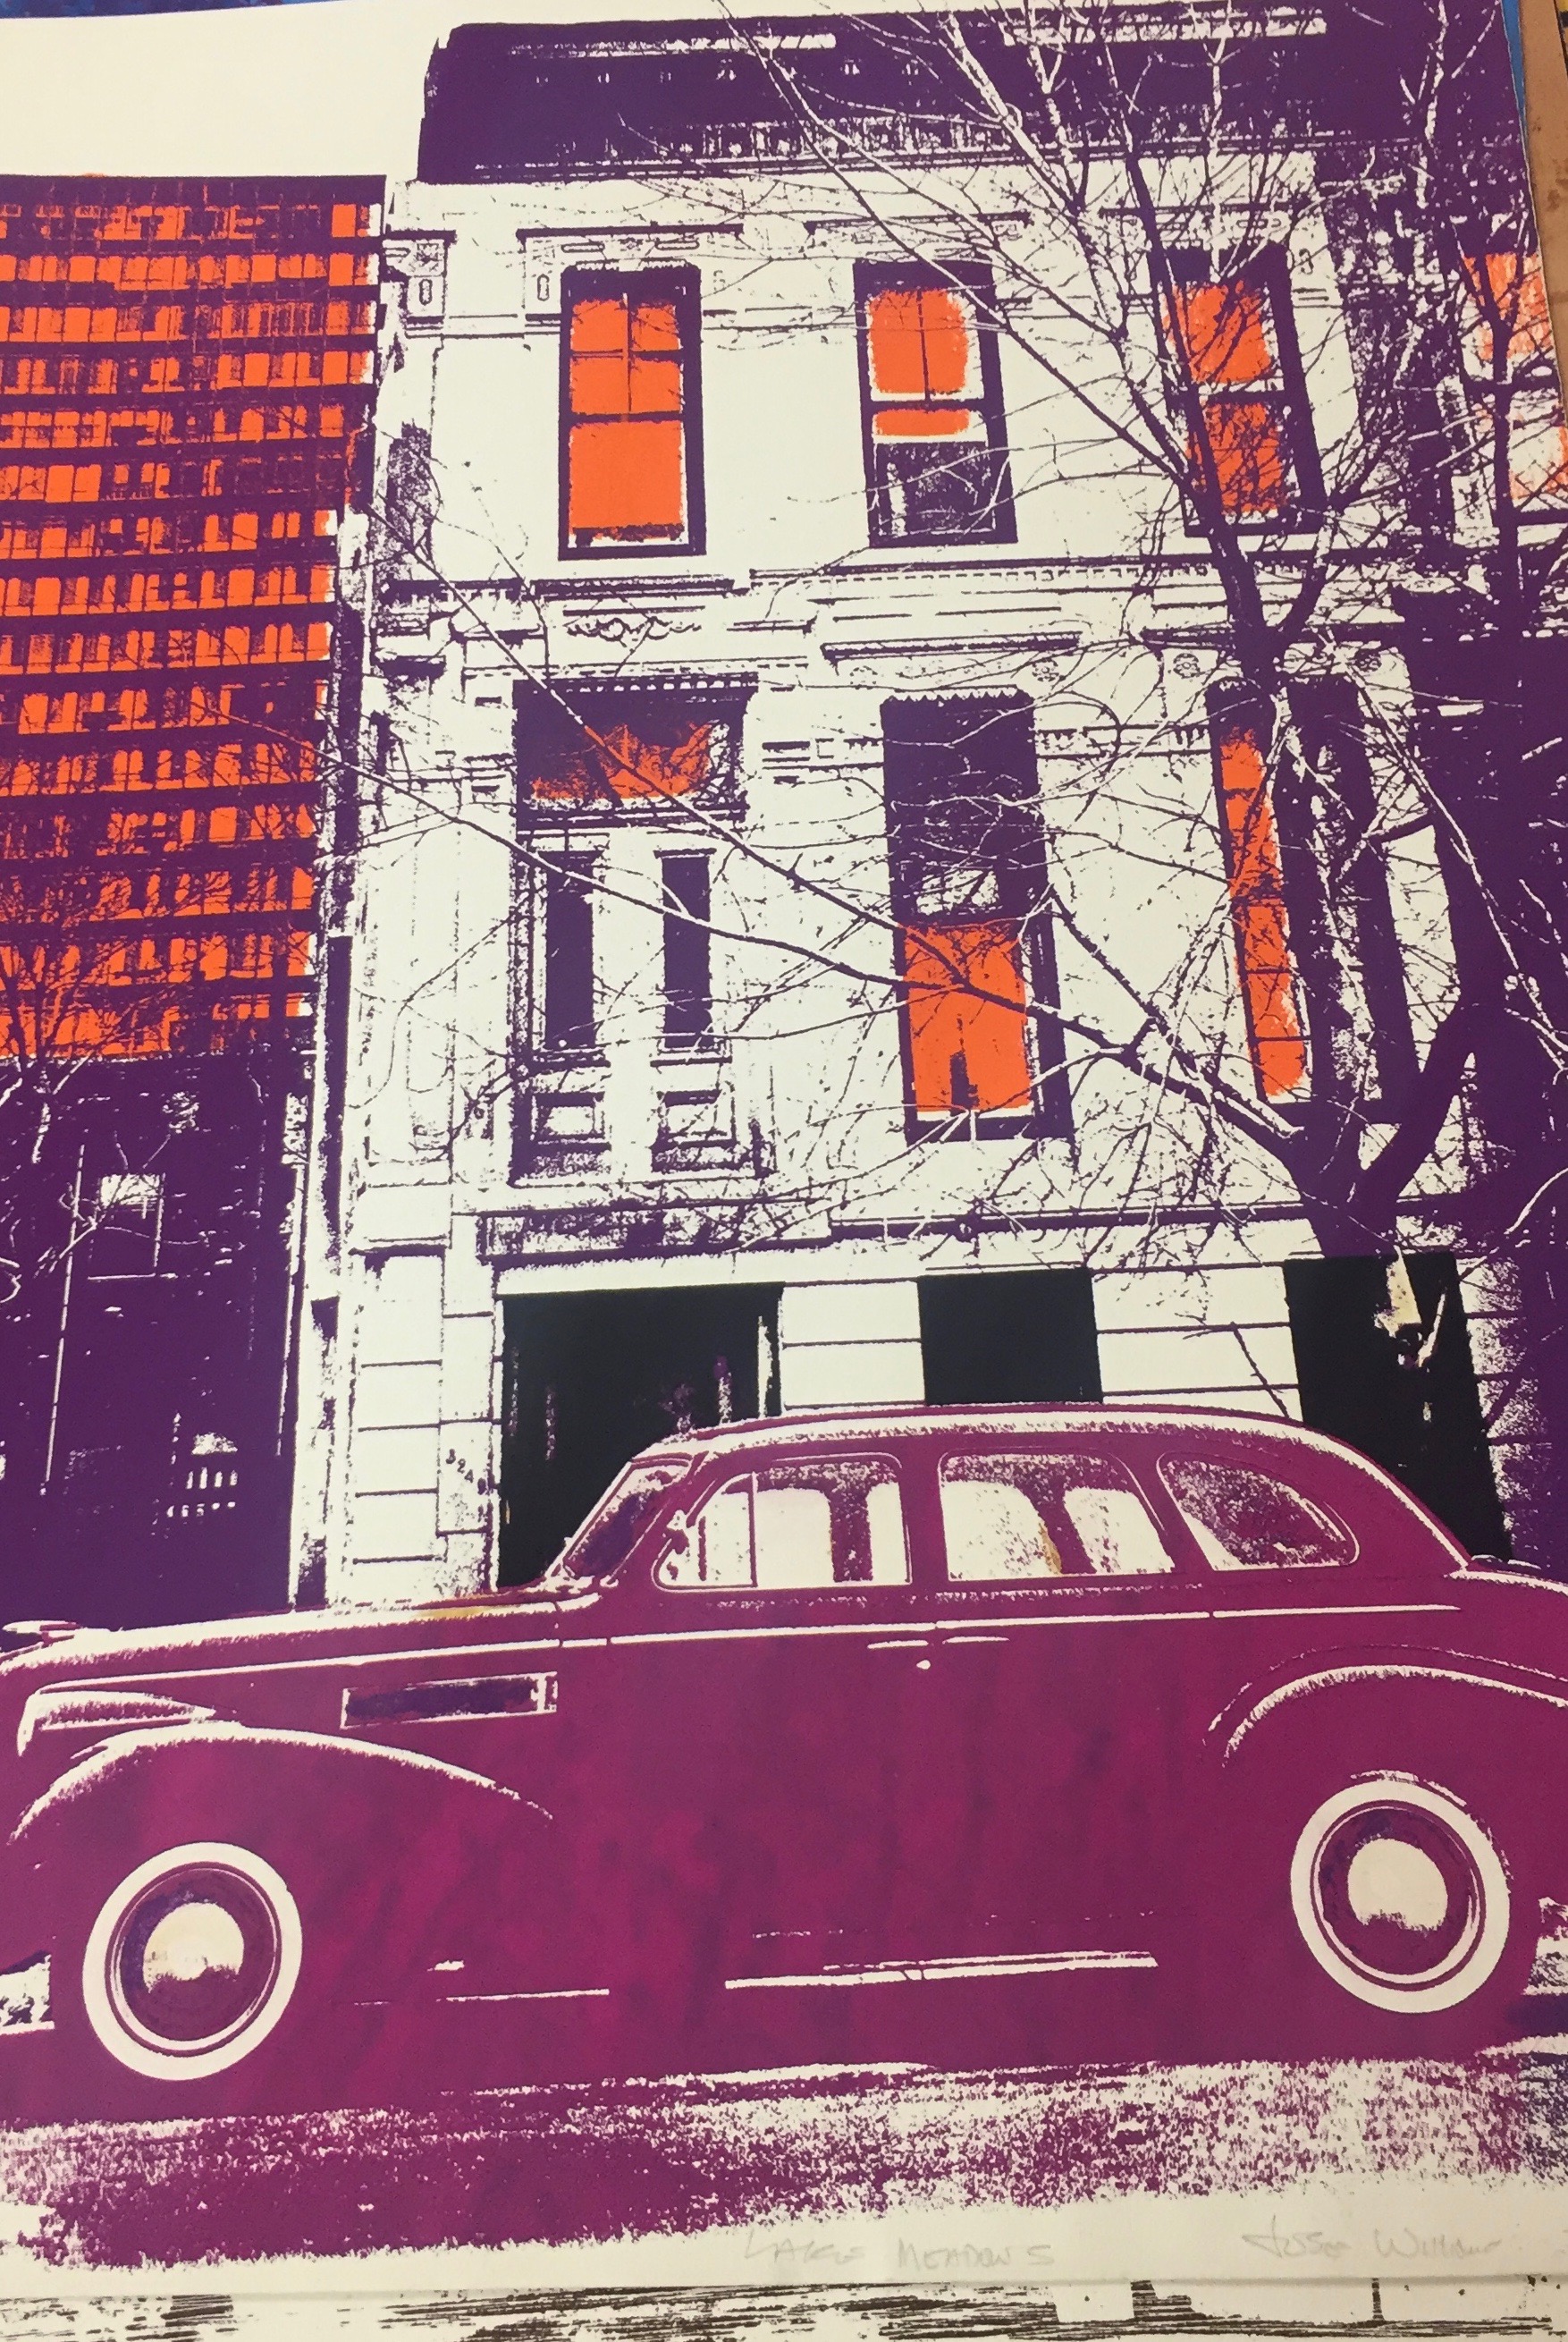 Jose Williams. “Lake Meadows,” 1975. An old-fashioned coupe parked in front of a tall apartment building, portrayed in whites, oranges, and purples. Illinois Institute of Technology, Paul Galvin Library, Special Collections .